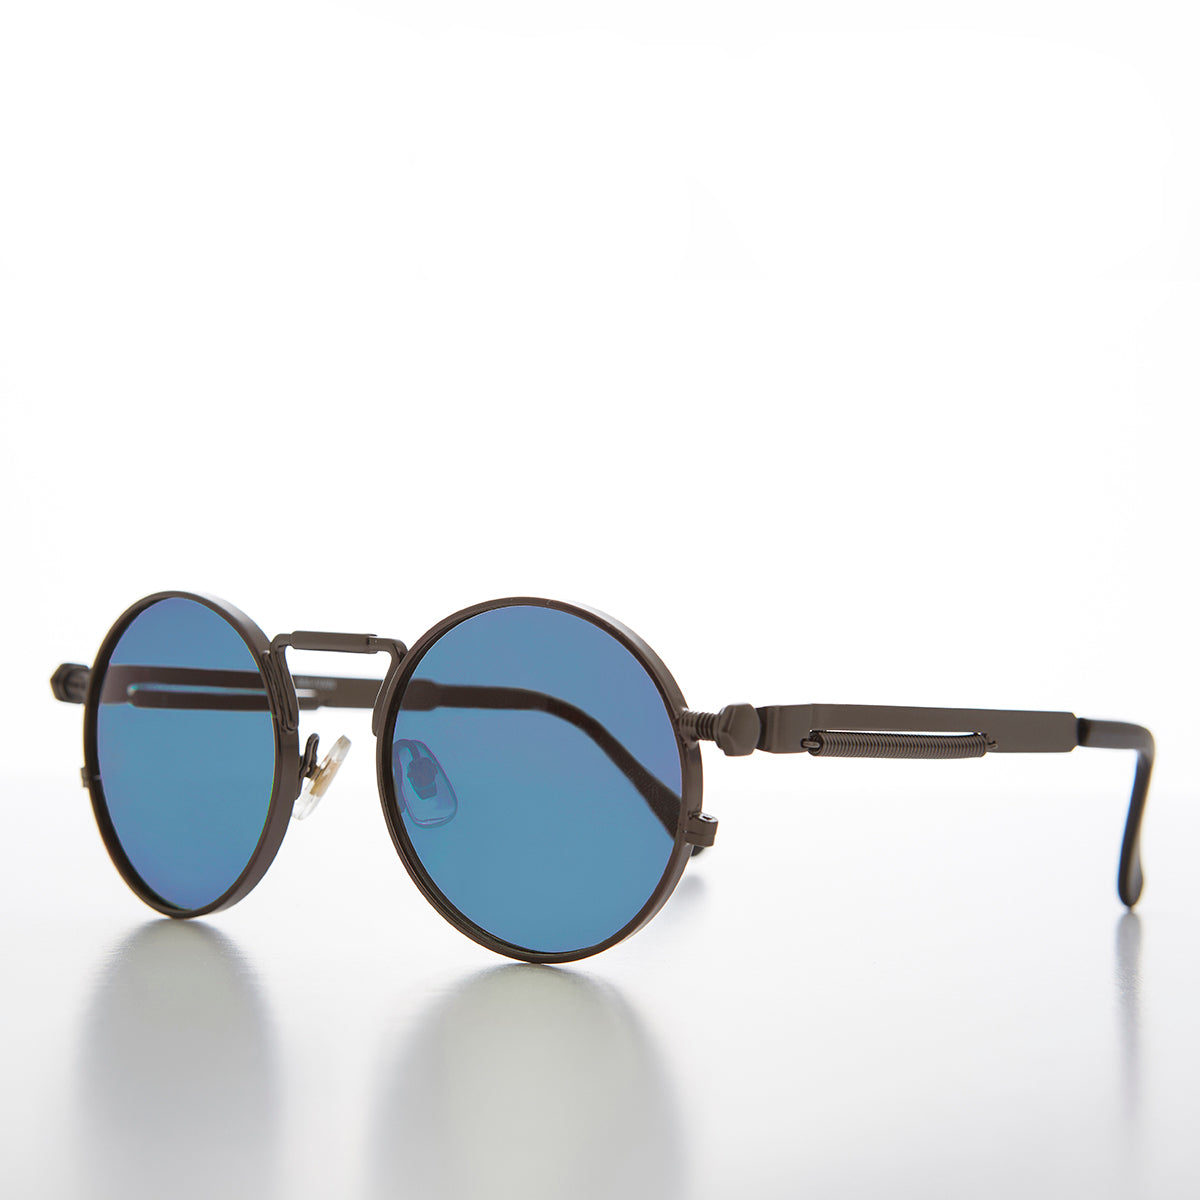 round steampunk sunglass with blue lens